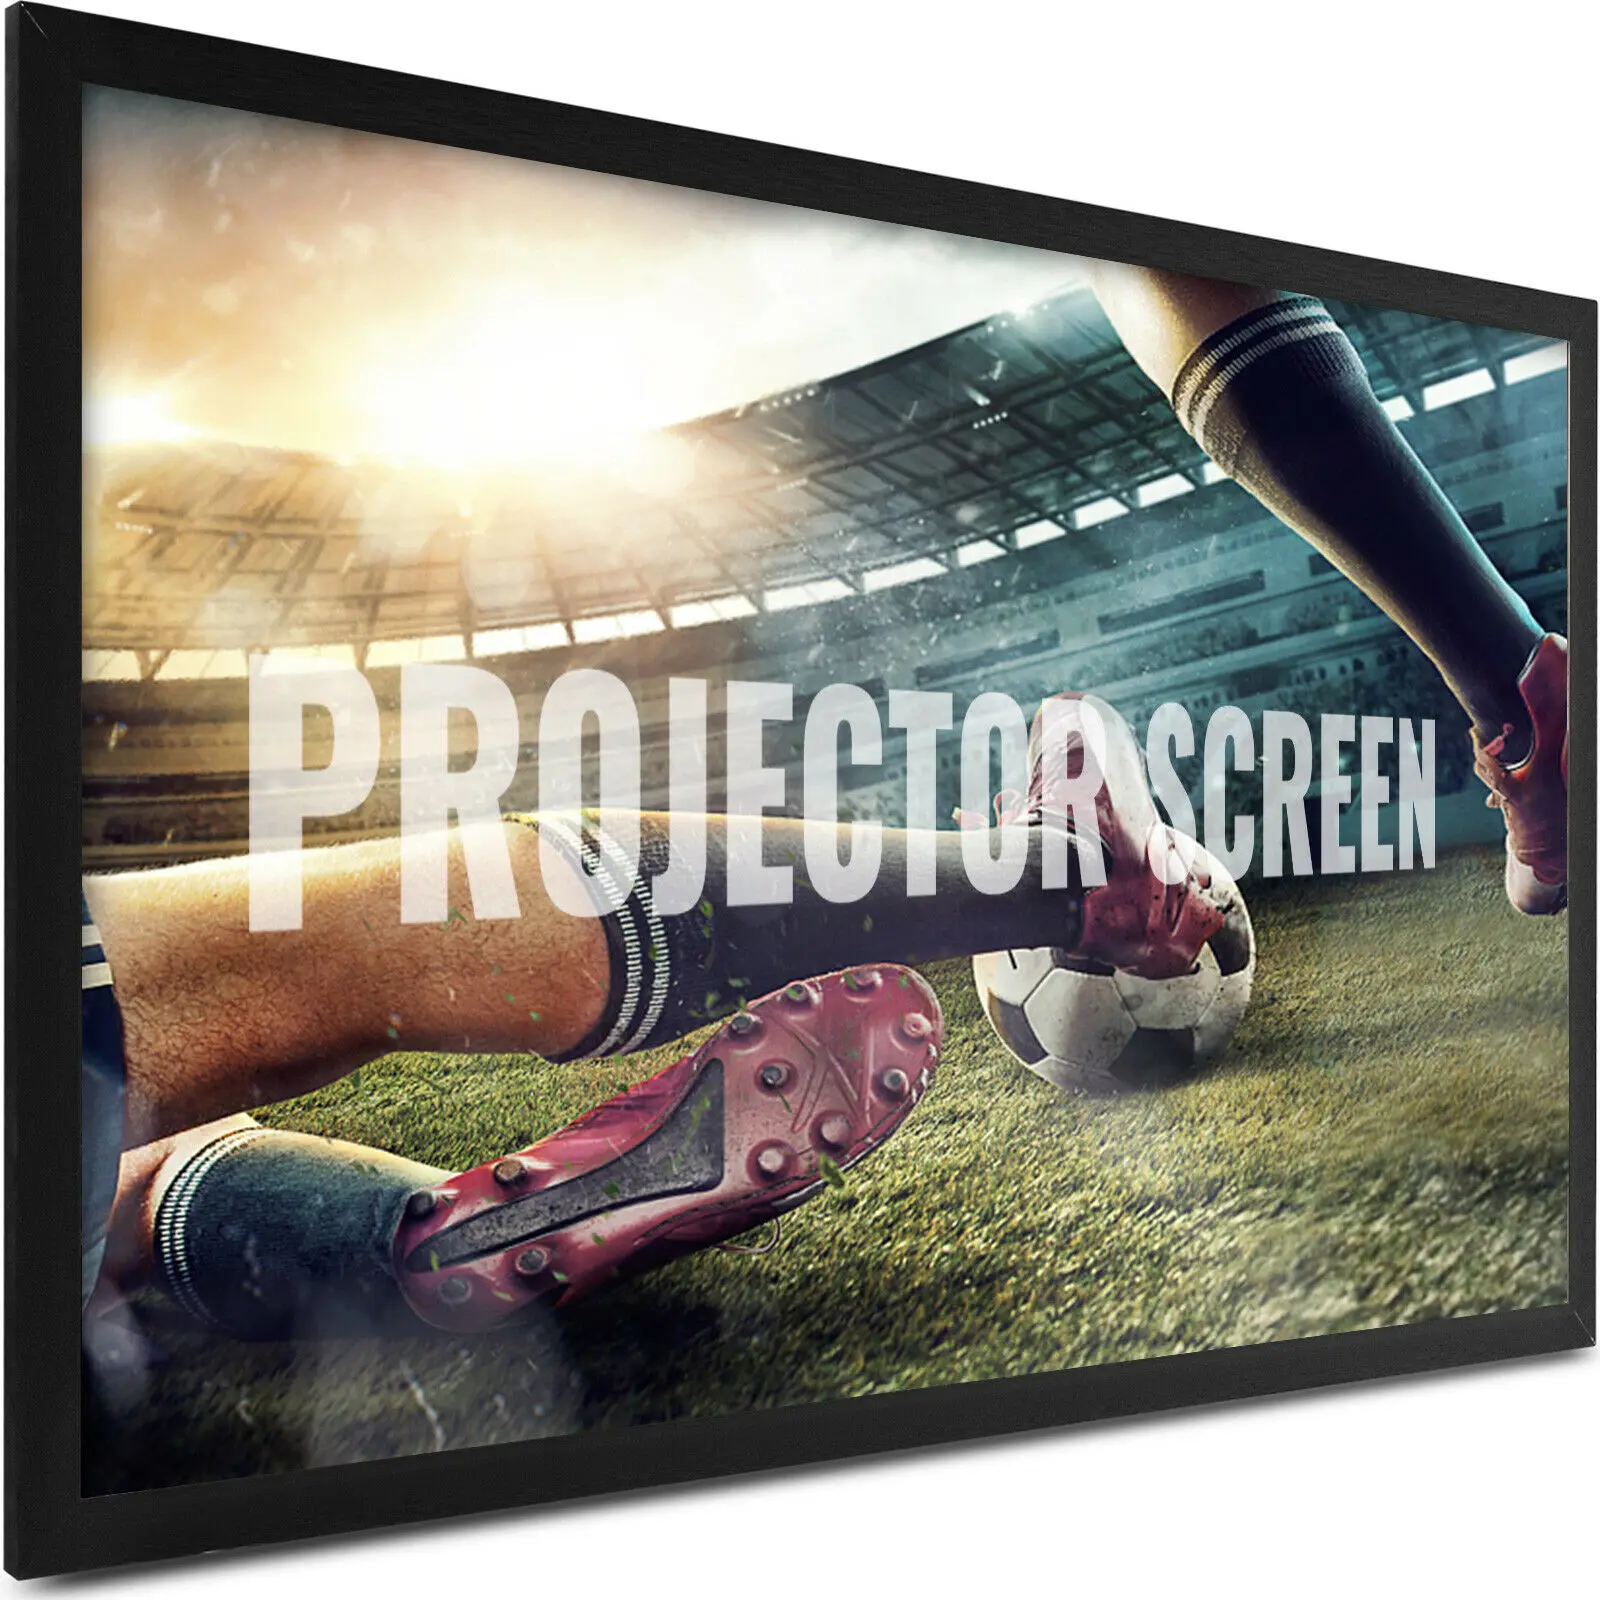 

White Screen Large Aluminum 100" 16:9 3D 4K Cinema Projection Canvas for Home Theater